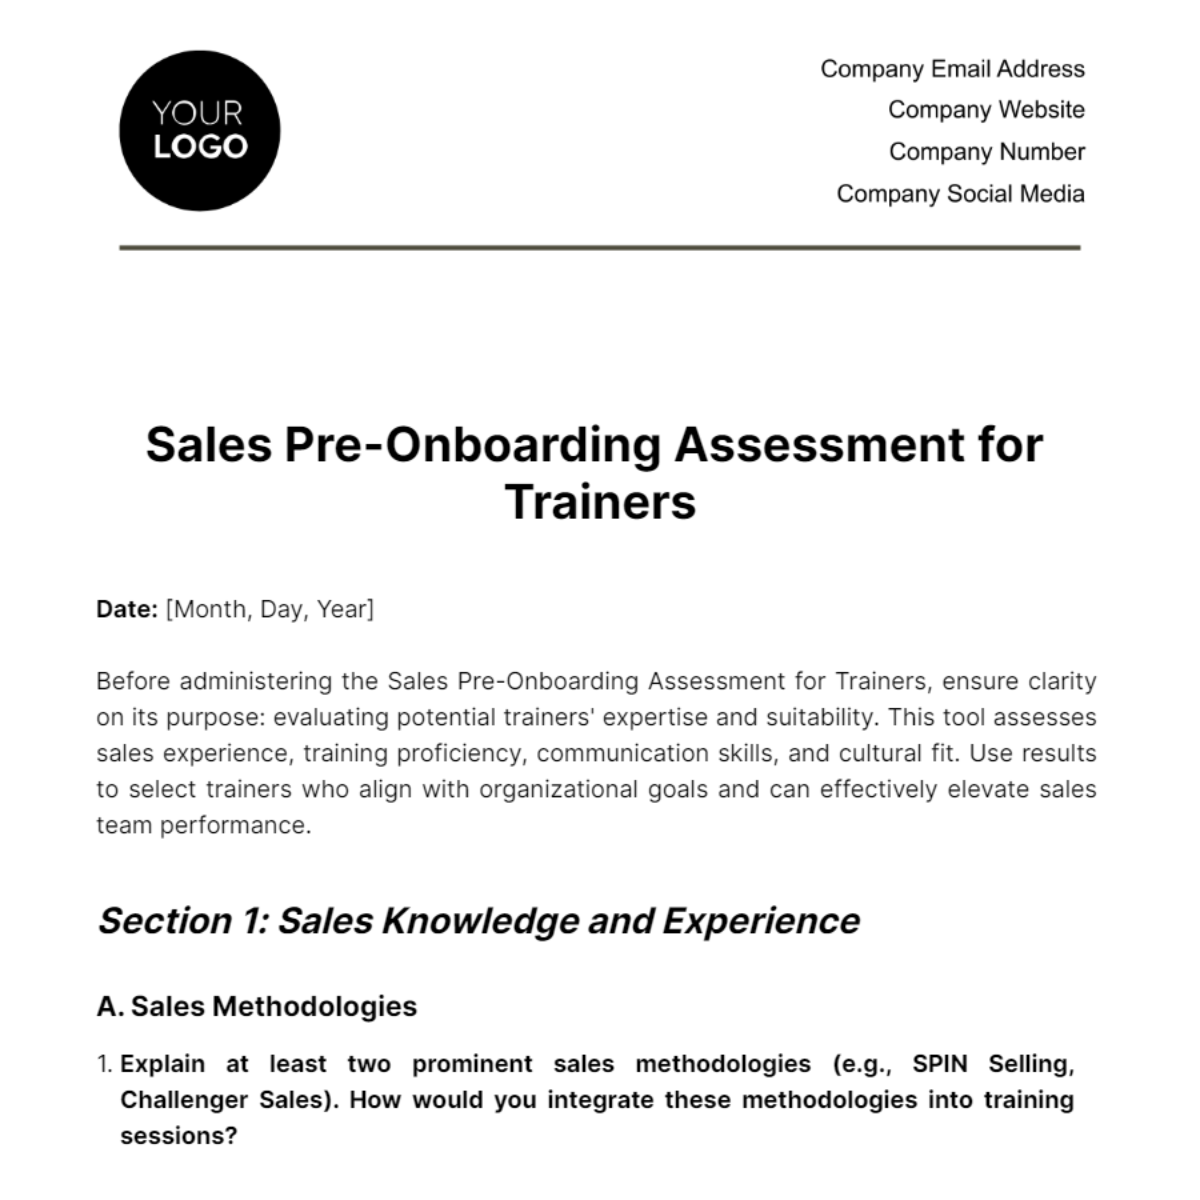 Sales Pre-Onboarding Assessment for Trainers Template